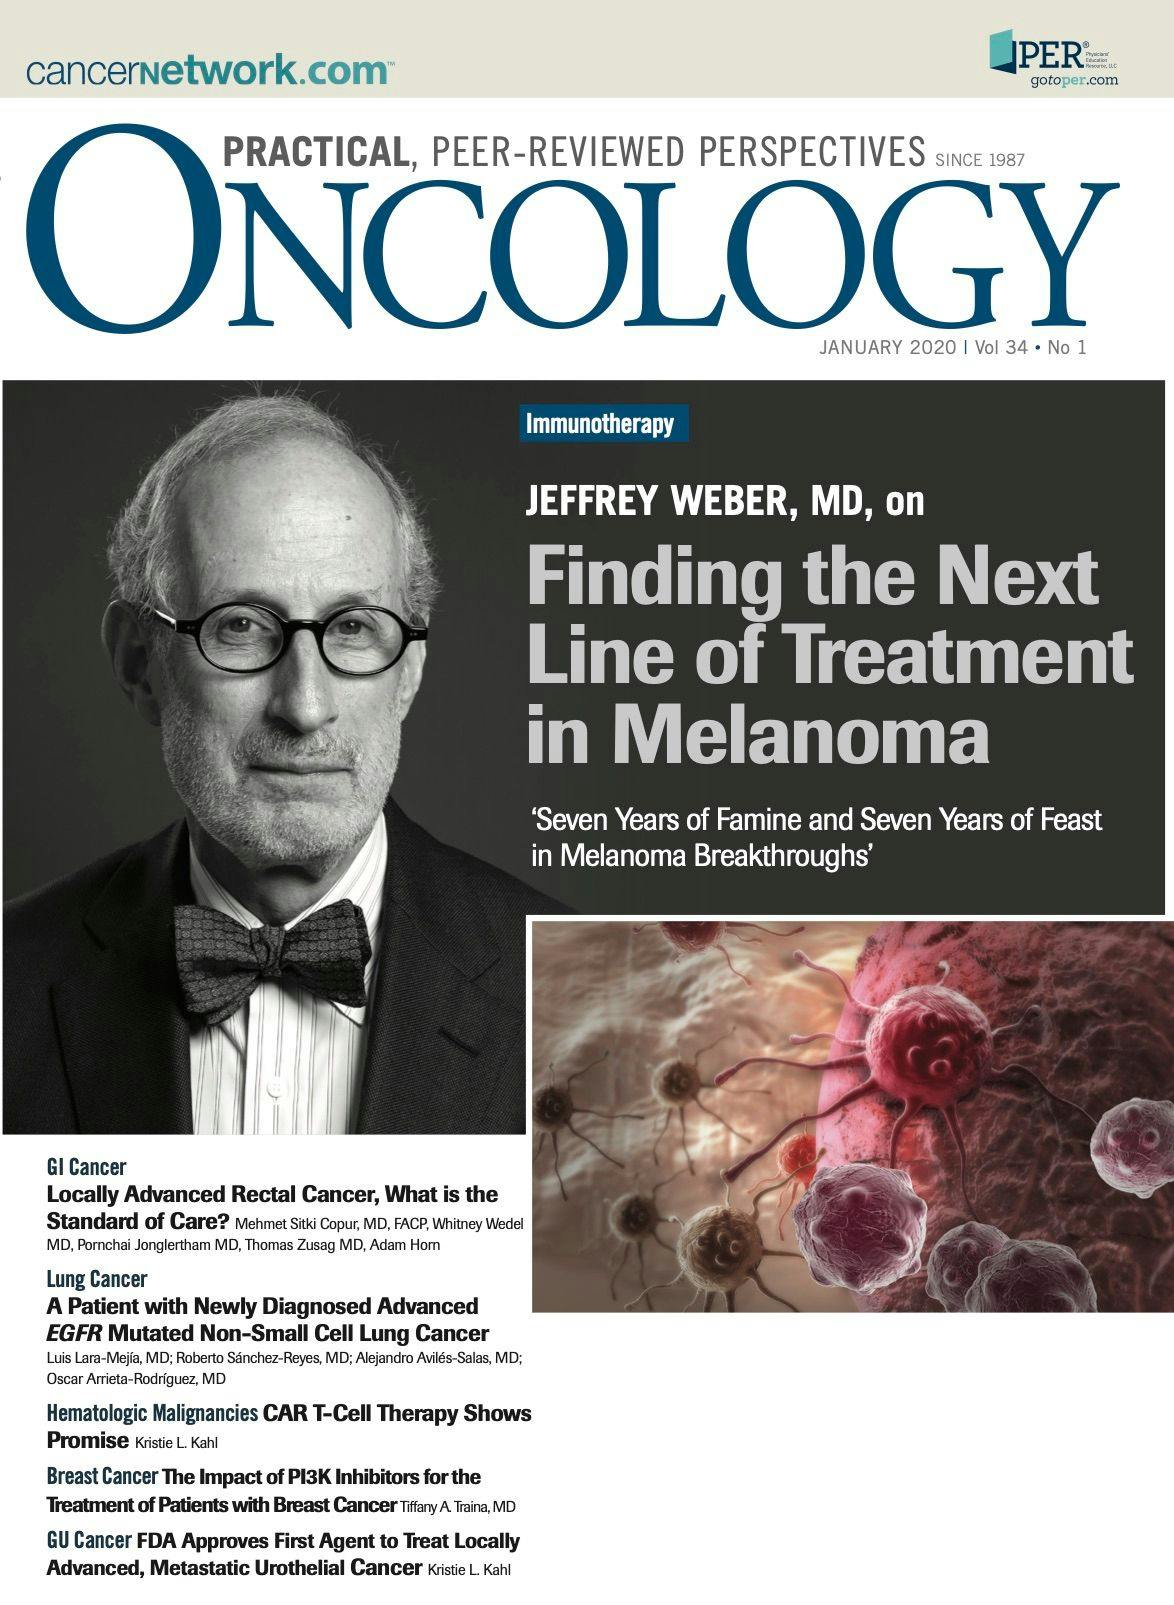 ONCOLOGY Vol 34 Issue 1